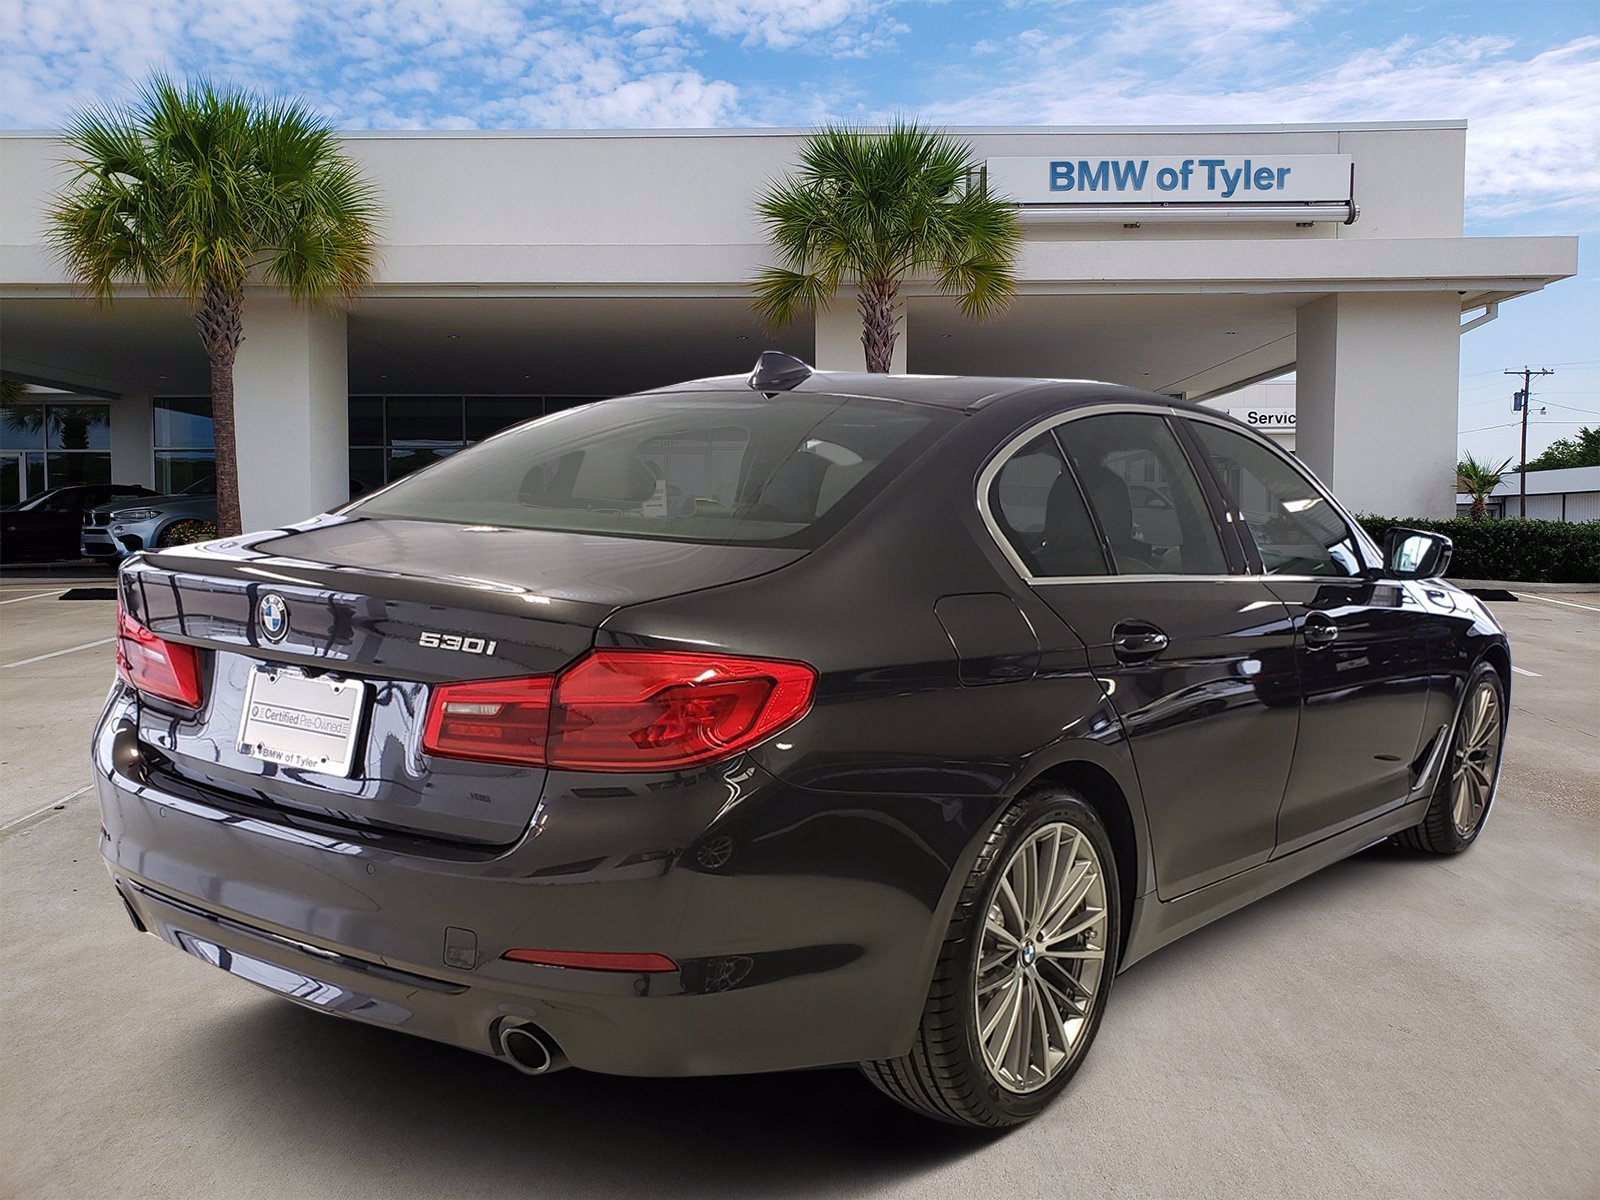 Pre-Owned 2019 BMW 5 Series 530i 4dr Car in Fayetteville #XW37707 ...